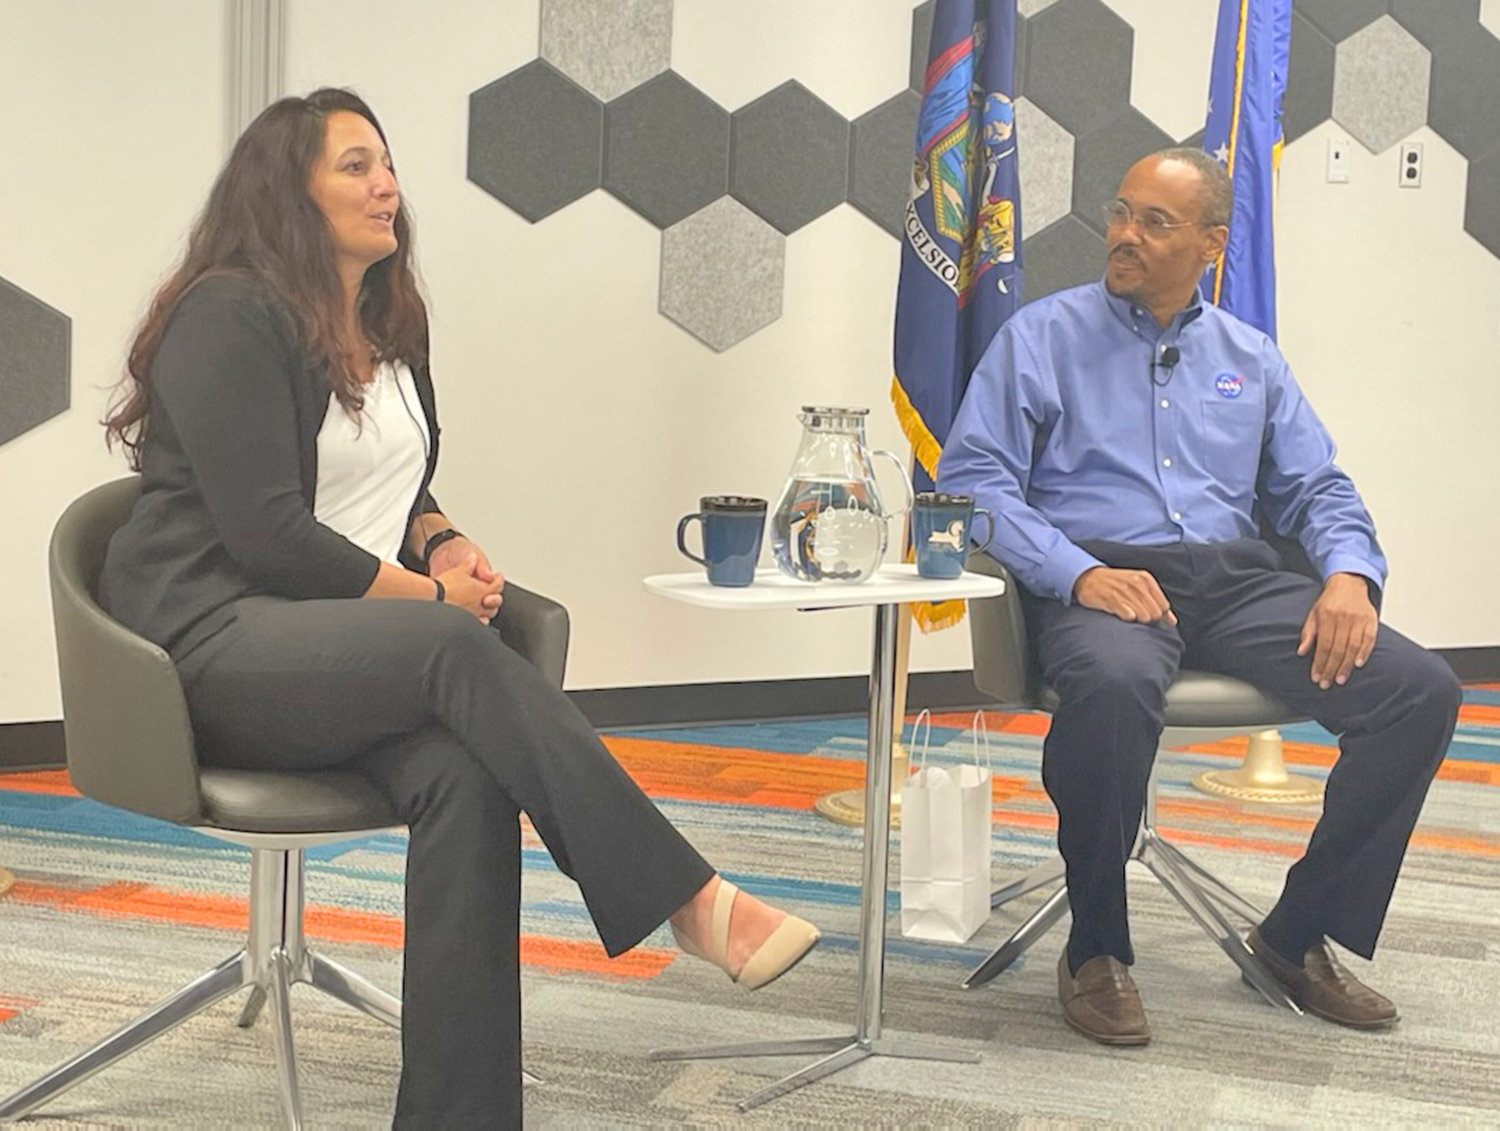 Innovare Community Manager-Griffiss Institute Melissa Tallman introduces U.S. Air Force Col. (Ret.) and Astronaut Benjamin Alvin Drew Jr. during Wednesday’s Down to Earth talk at Innovare Advancement Center on Hangar Road in Rome.(Photo by Nicole A. Hawley)